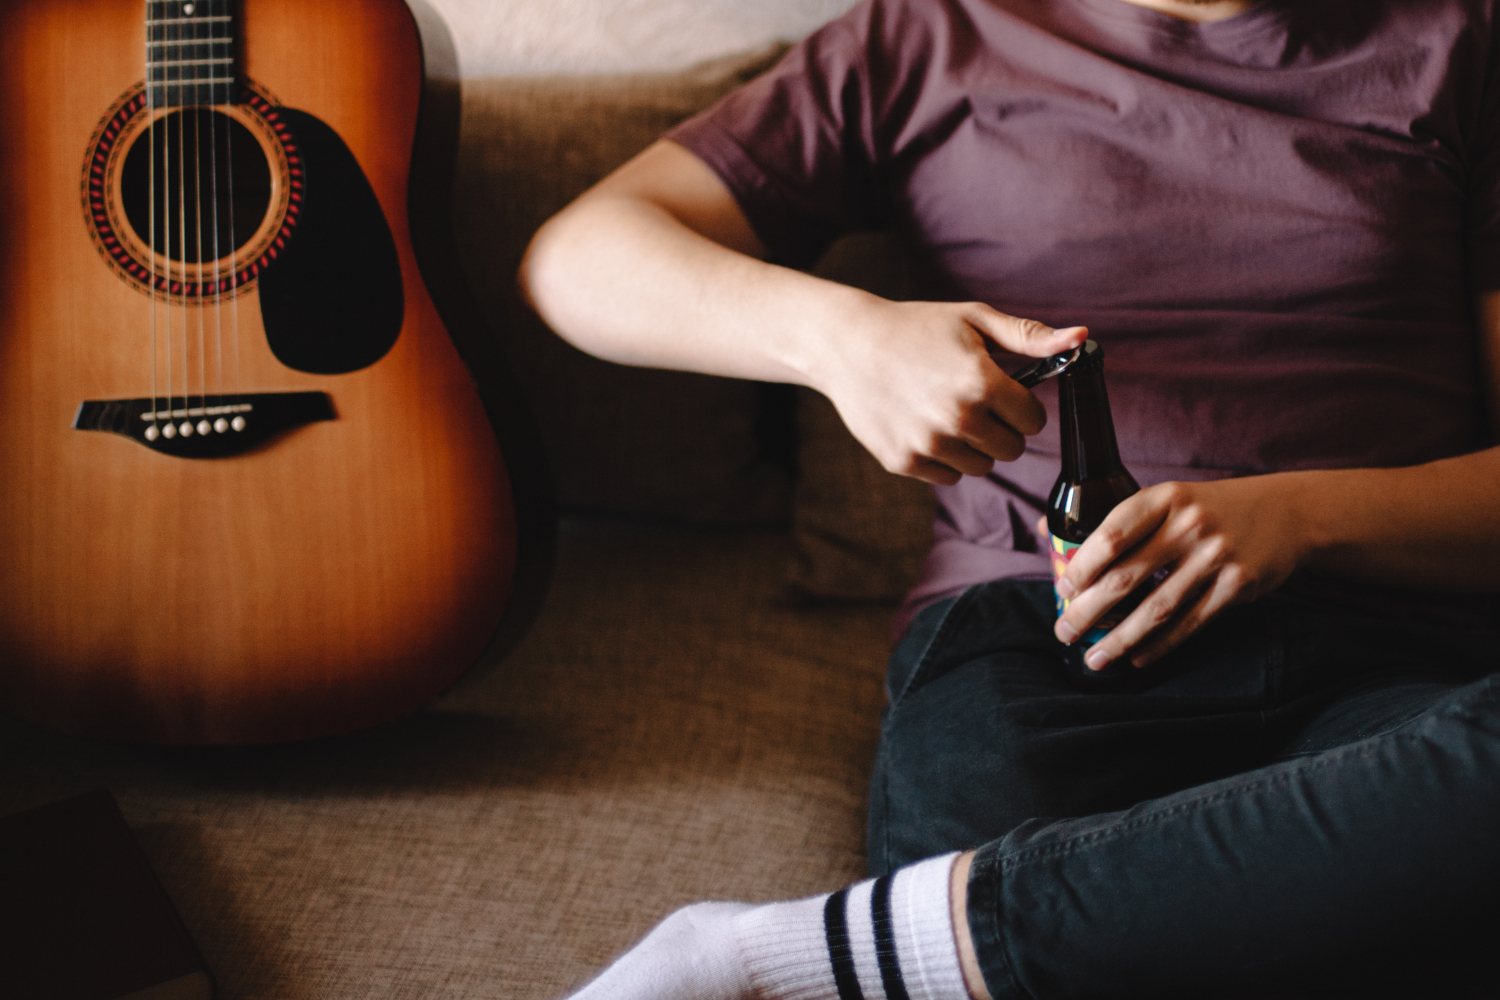 musician opens bottle of beer on couch next to guitar